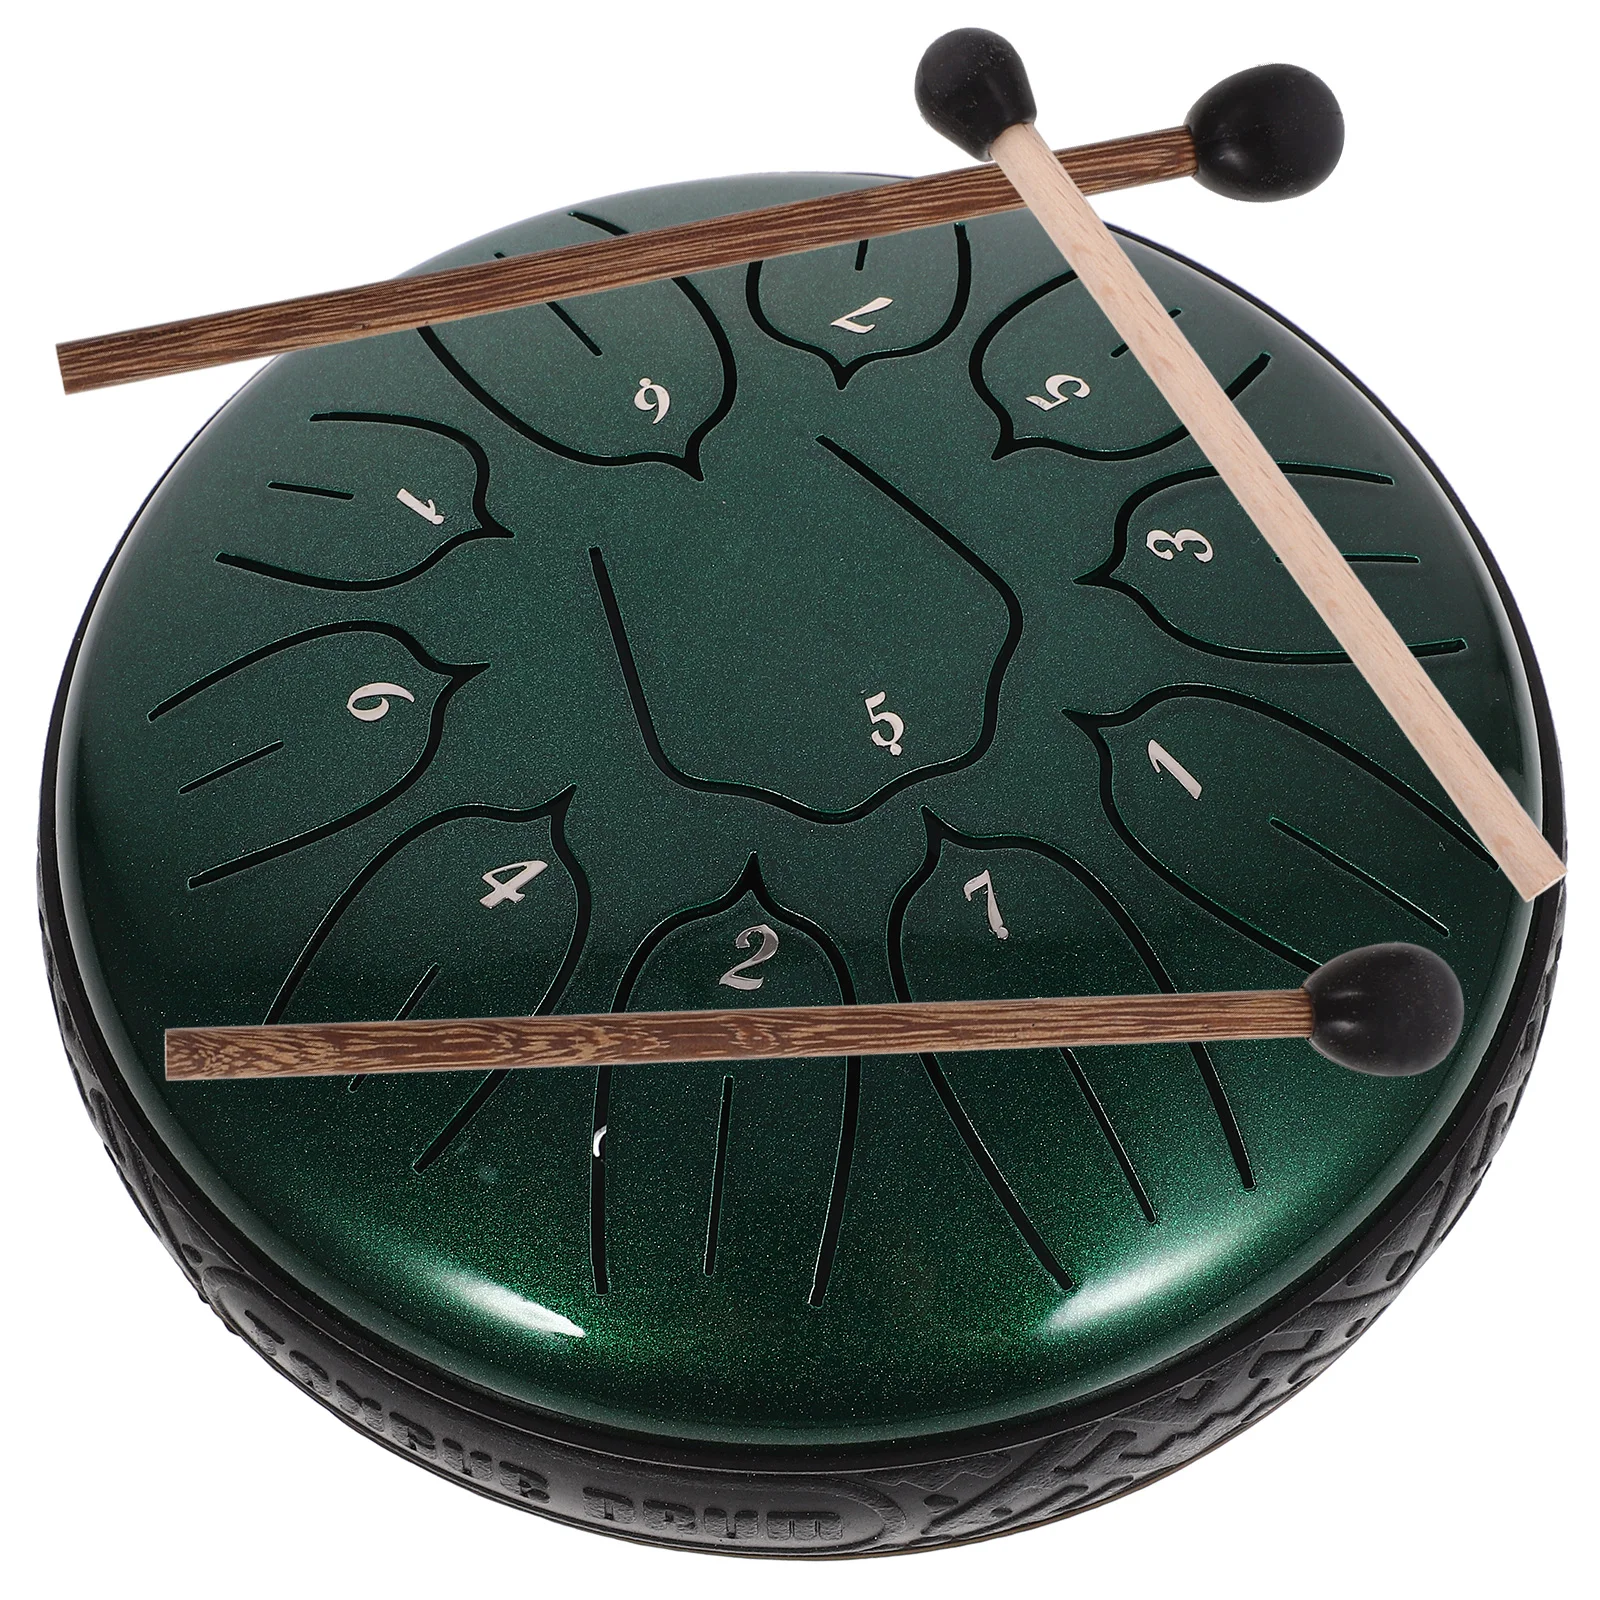 

Steel Tongue Drum Chic Instrument Kids Adult Playing Ethereal Gift Choice Exquisite Titanium Alloy Interesting Percussion Child